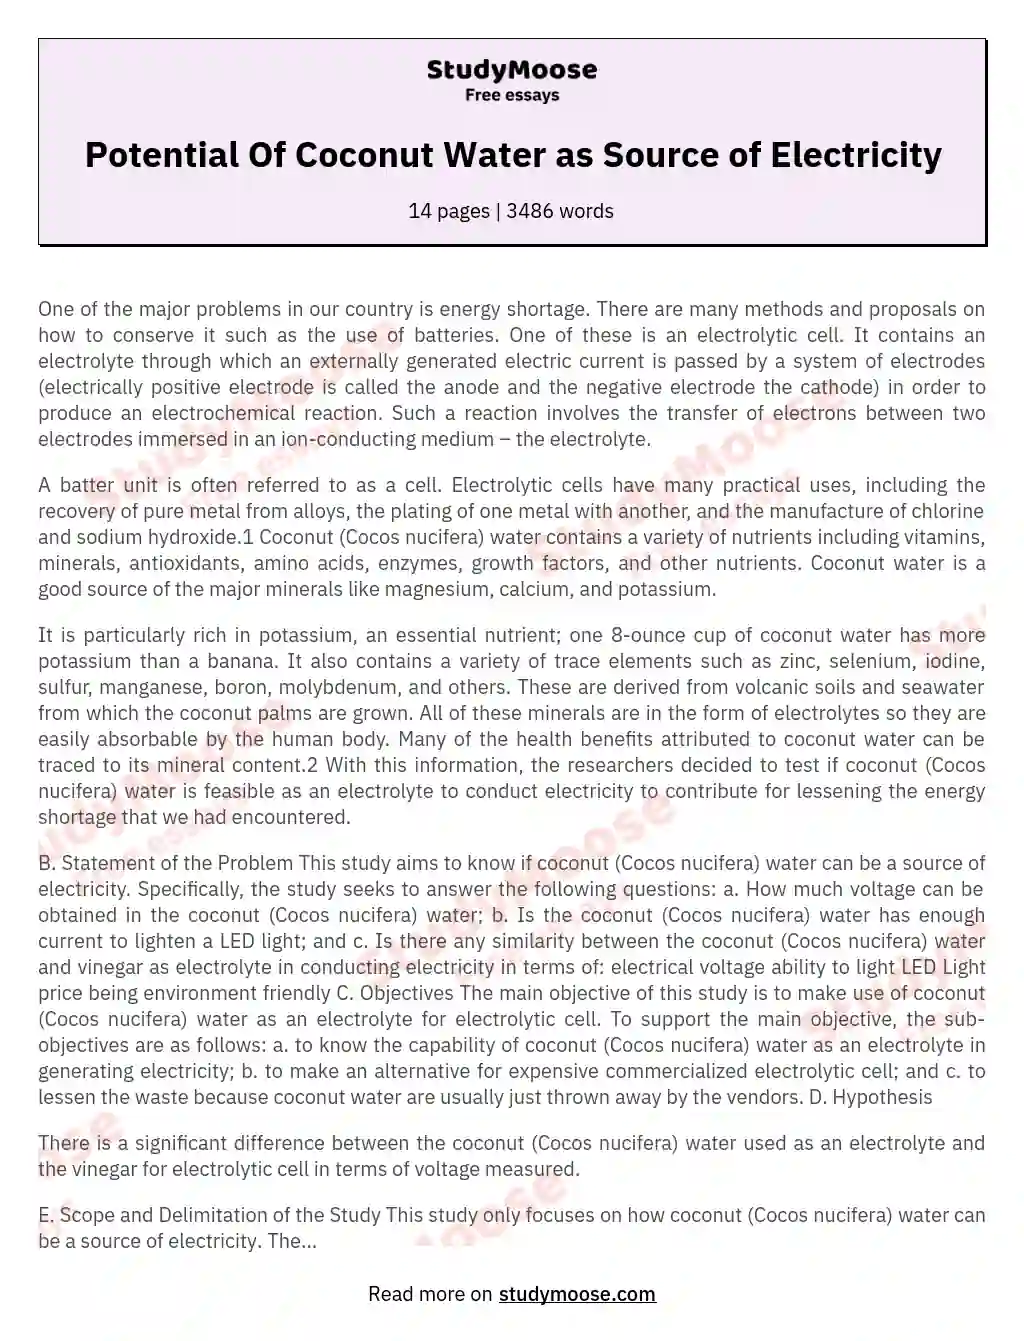 Potential Of Coconut Water as Source of Electricity essay